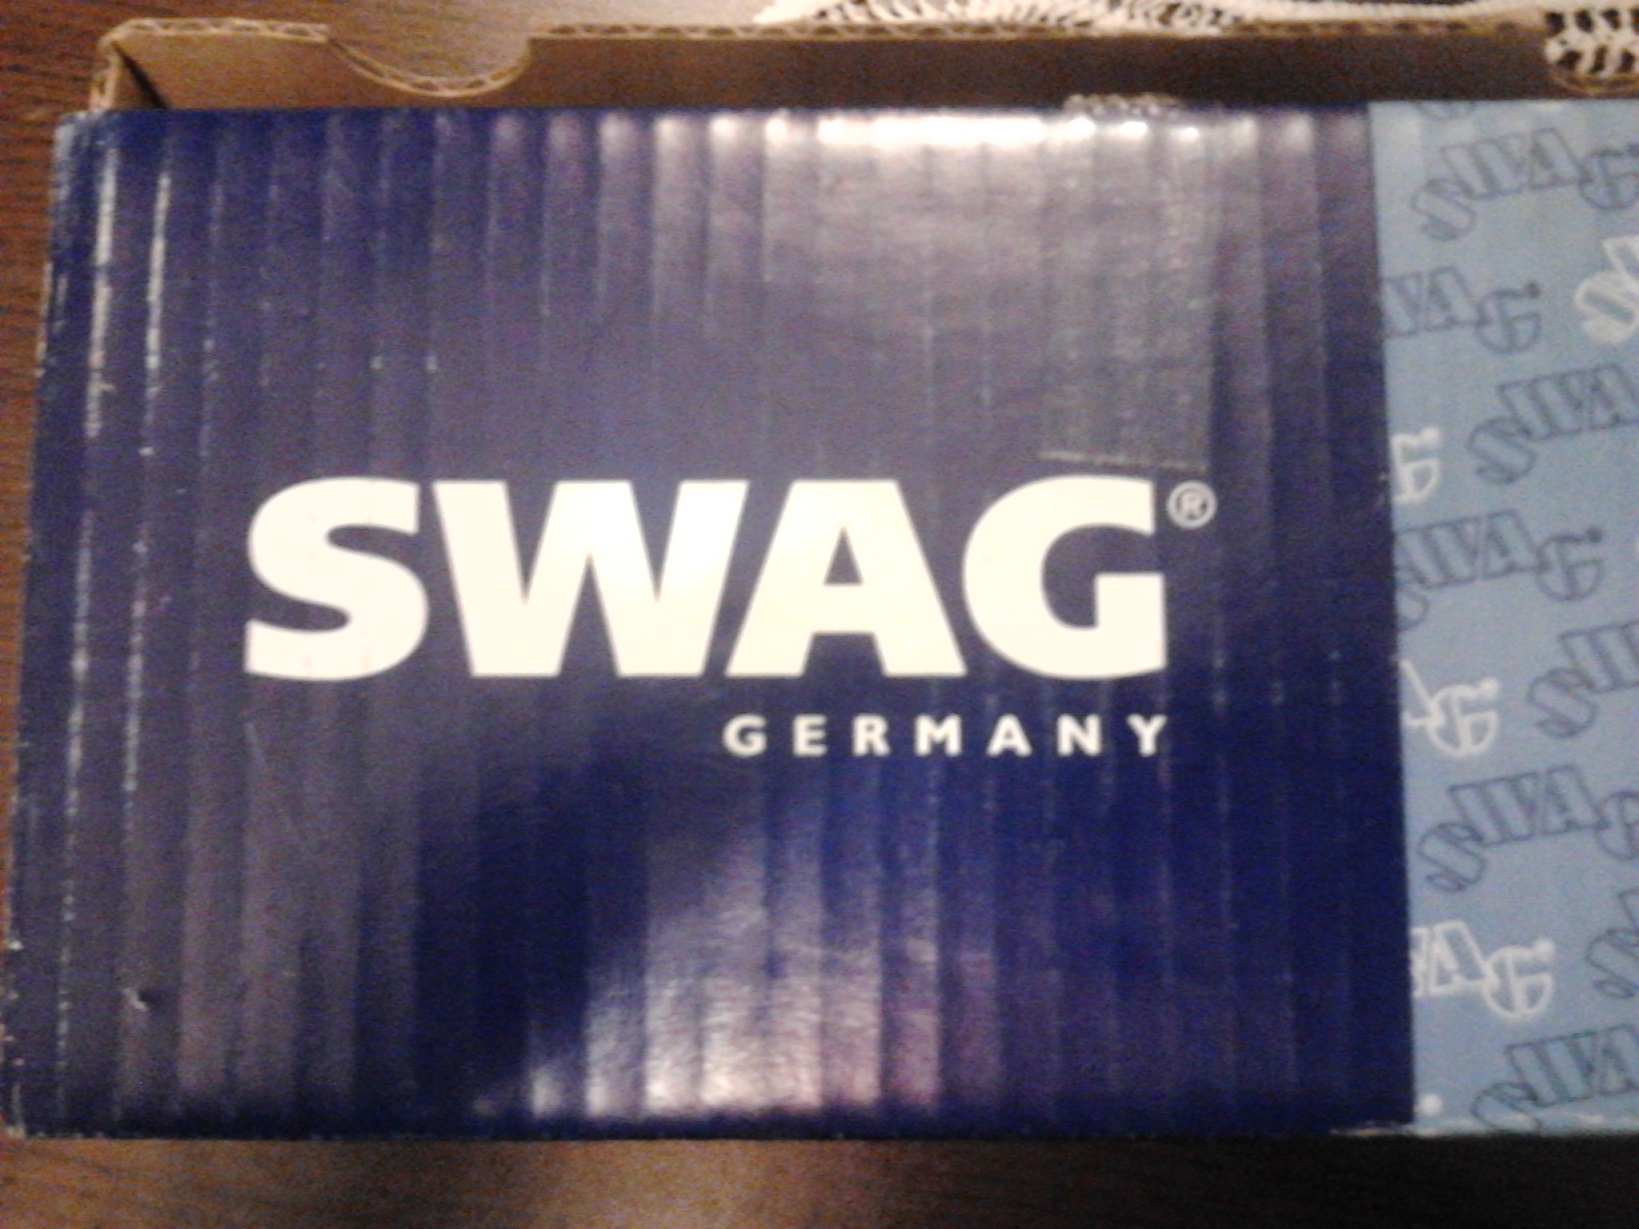 A box filled with german quality SWAG